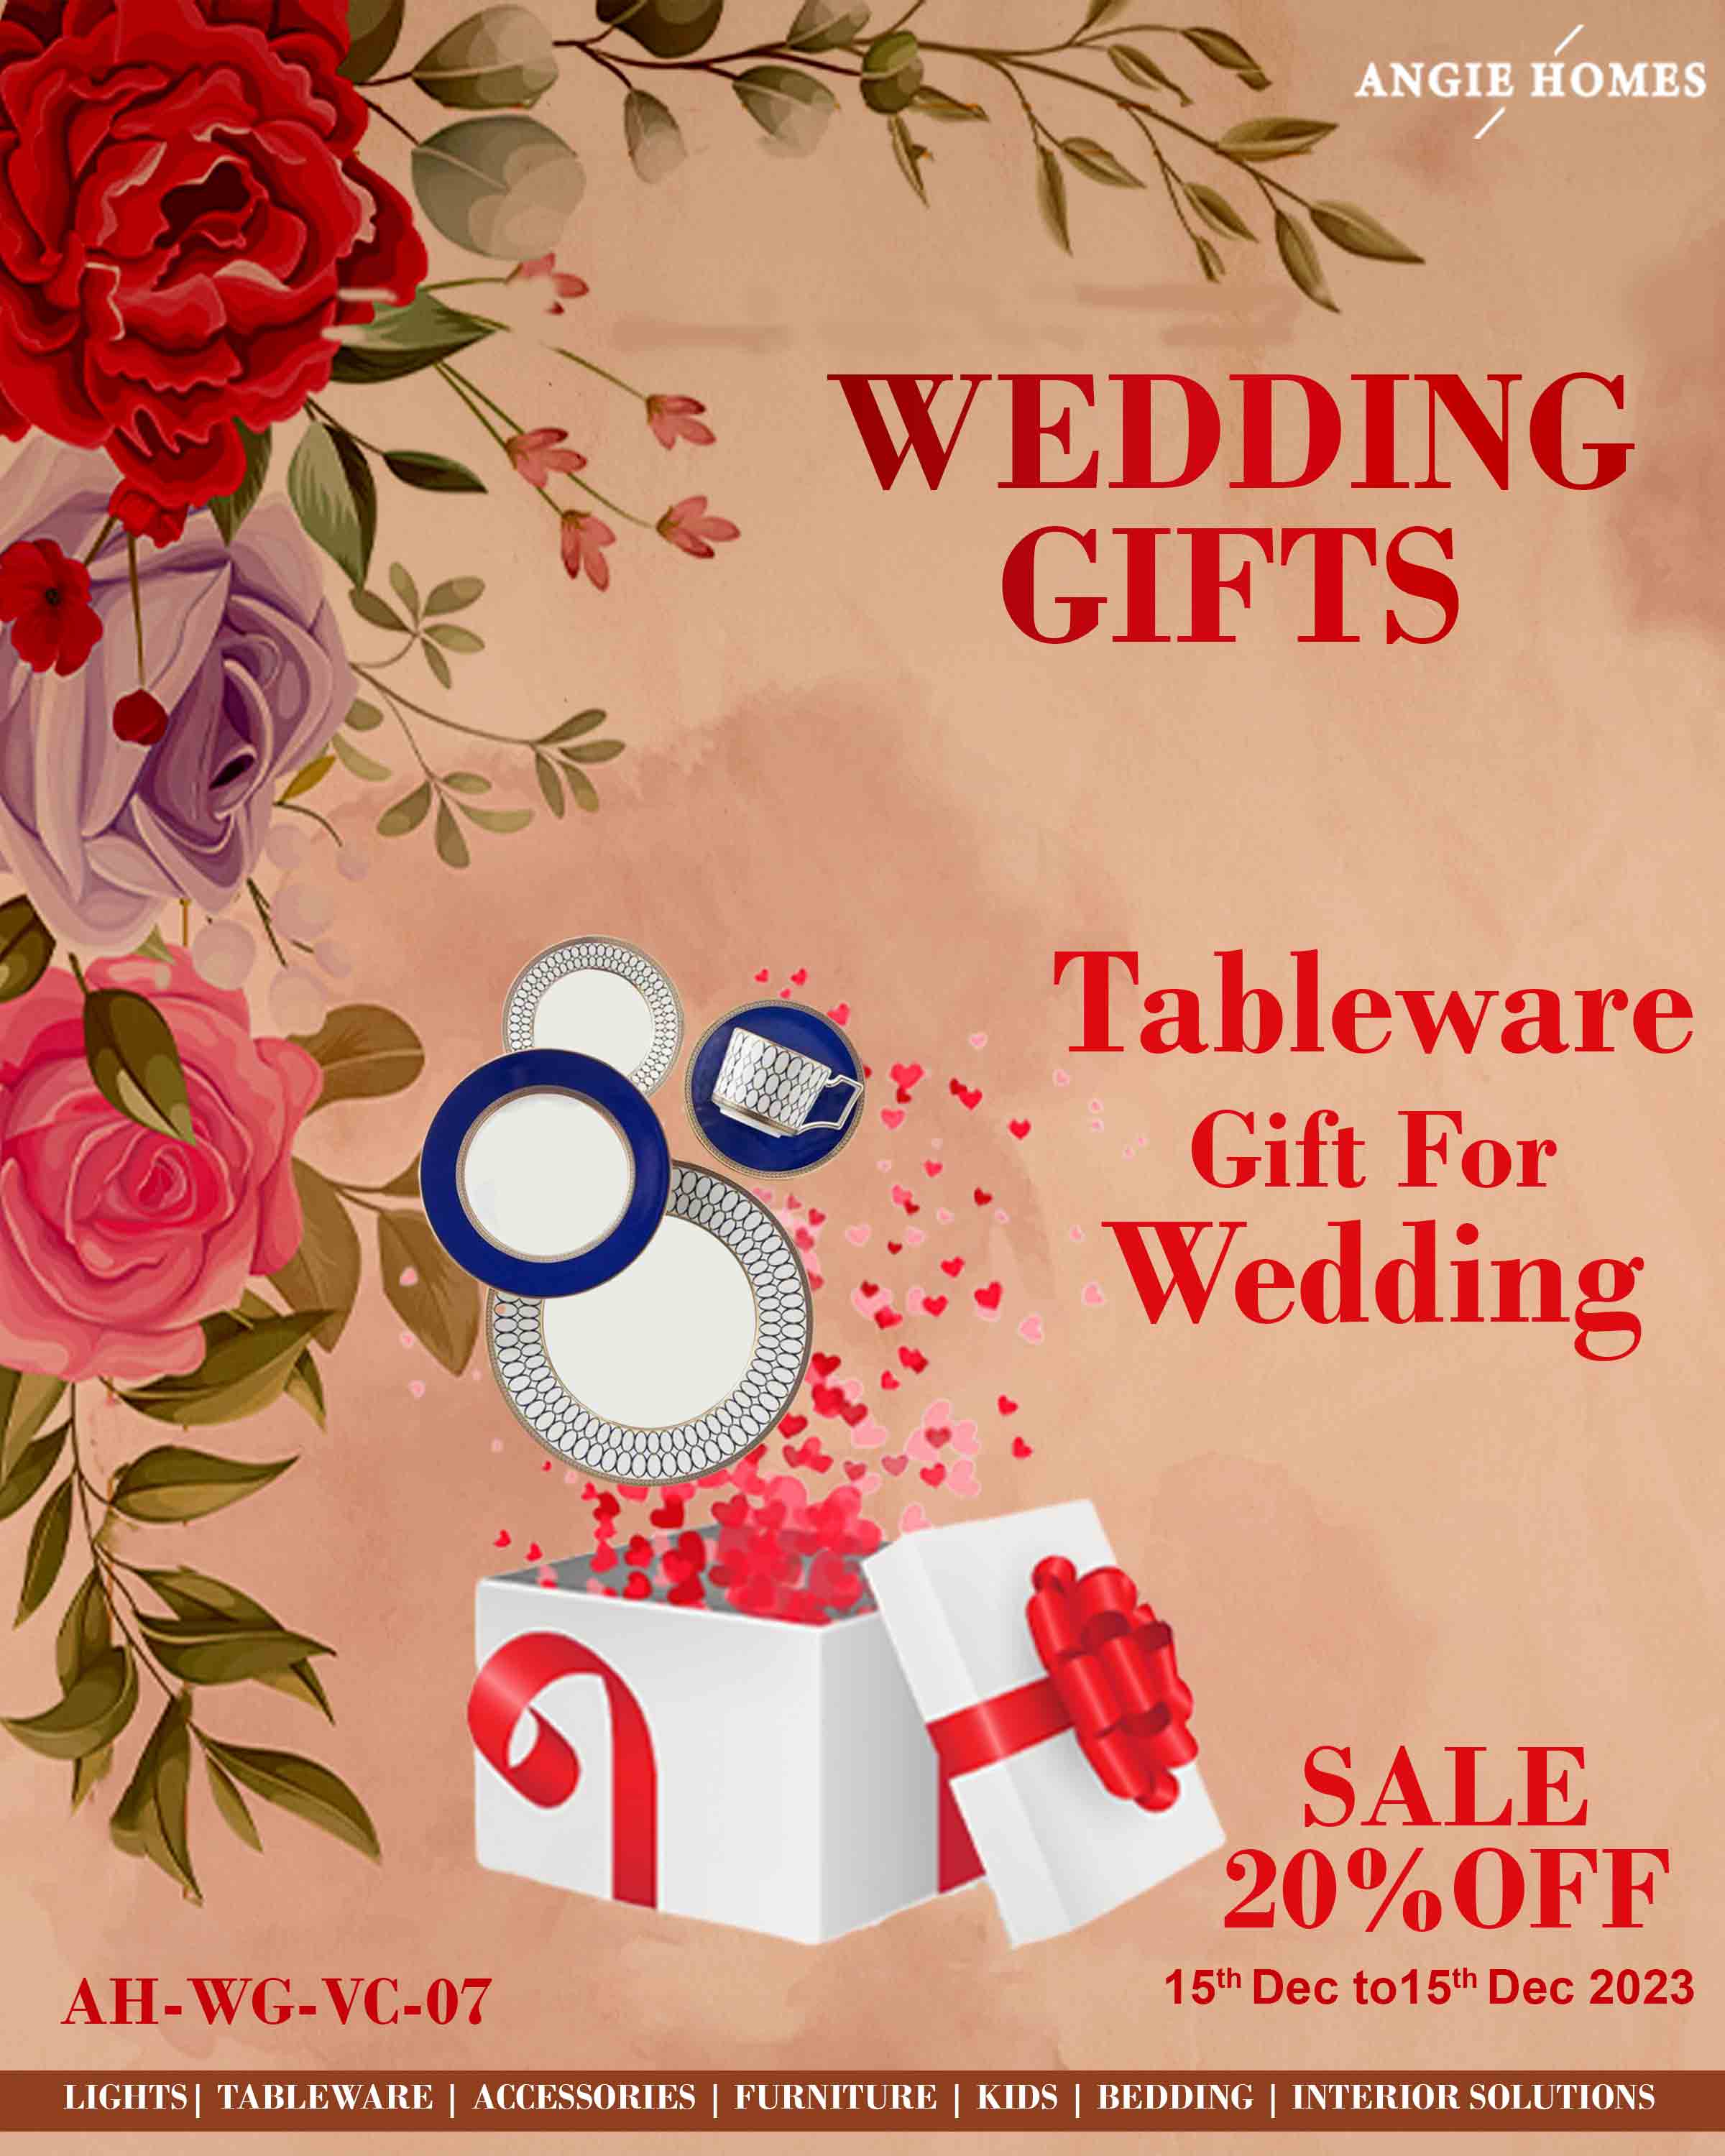 TABLEWARE SET FOR WEDDING GIFTS | MARRIAGE GIFT VOUCHER | TABLE TOP GIFTTING CARD ANGIE HOMES